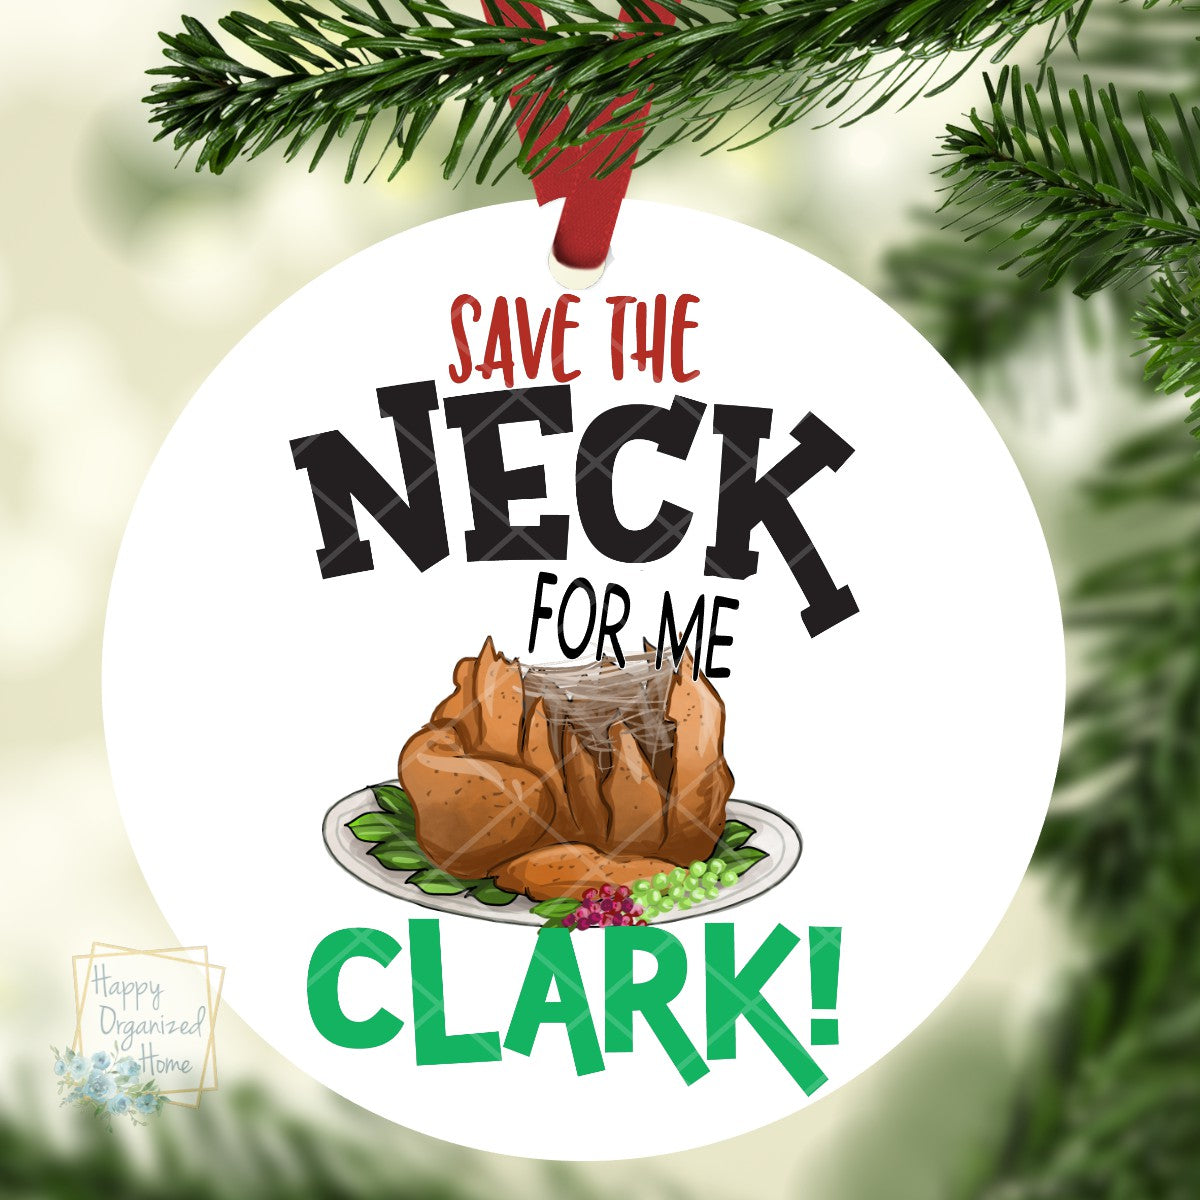 Save the neck for me - Christmas Ornament